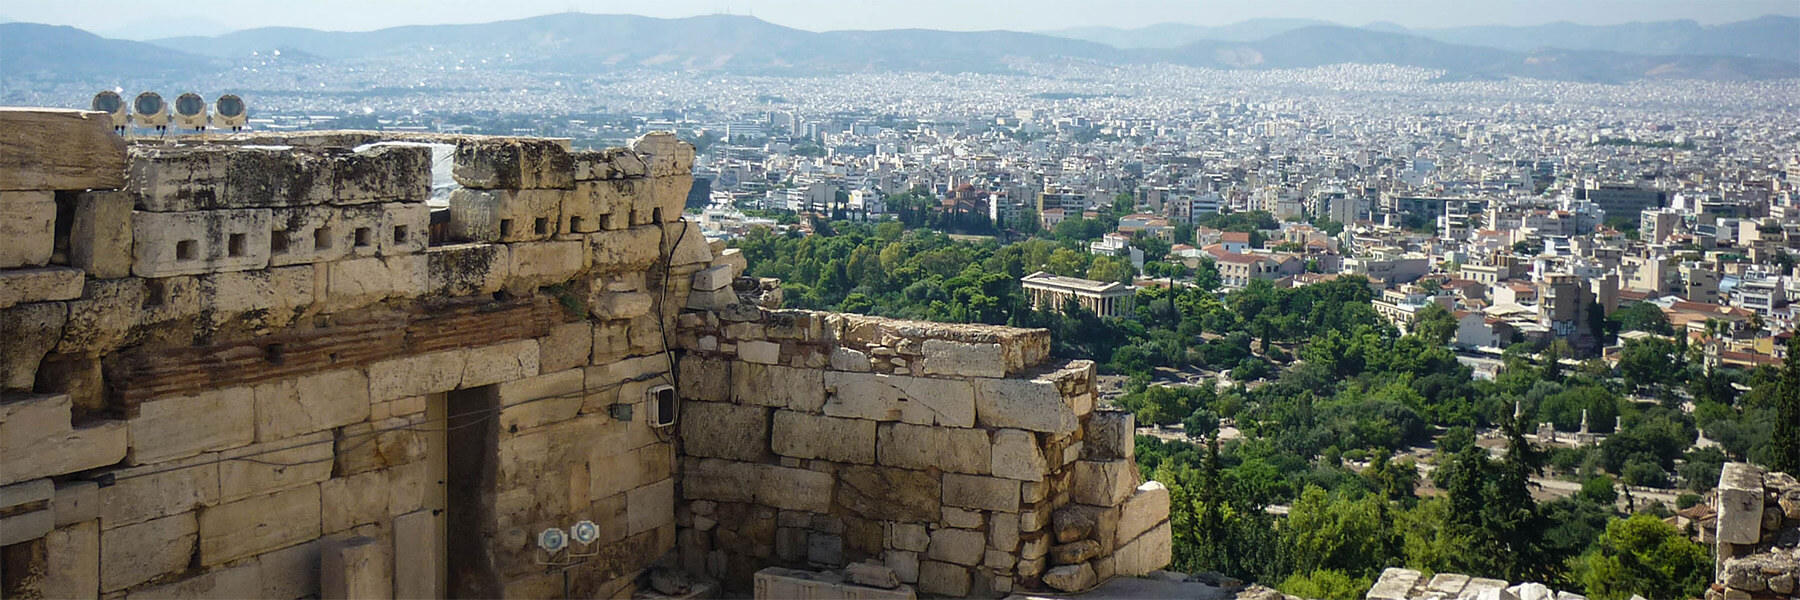 a view of a modern city in Greece with some historical structures still standing